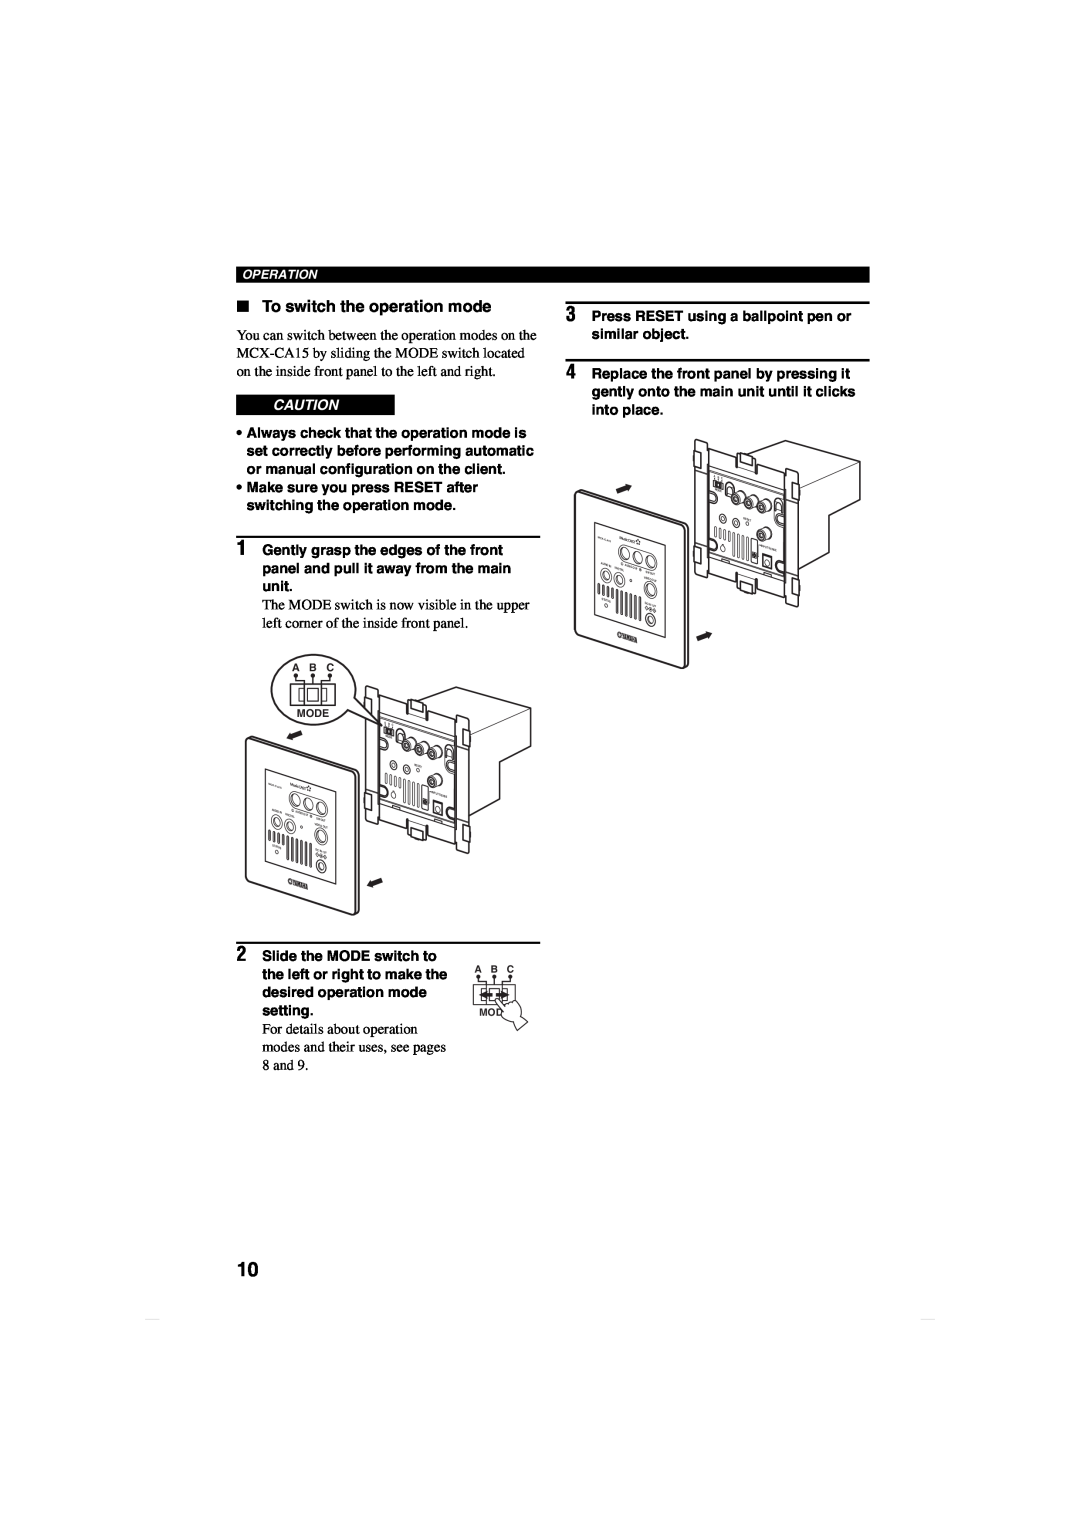 Yamaha MCX-CA15 owner manual To switch the operation mode 